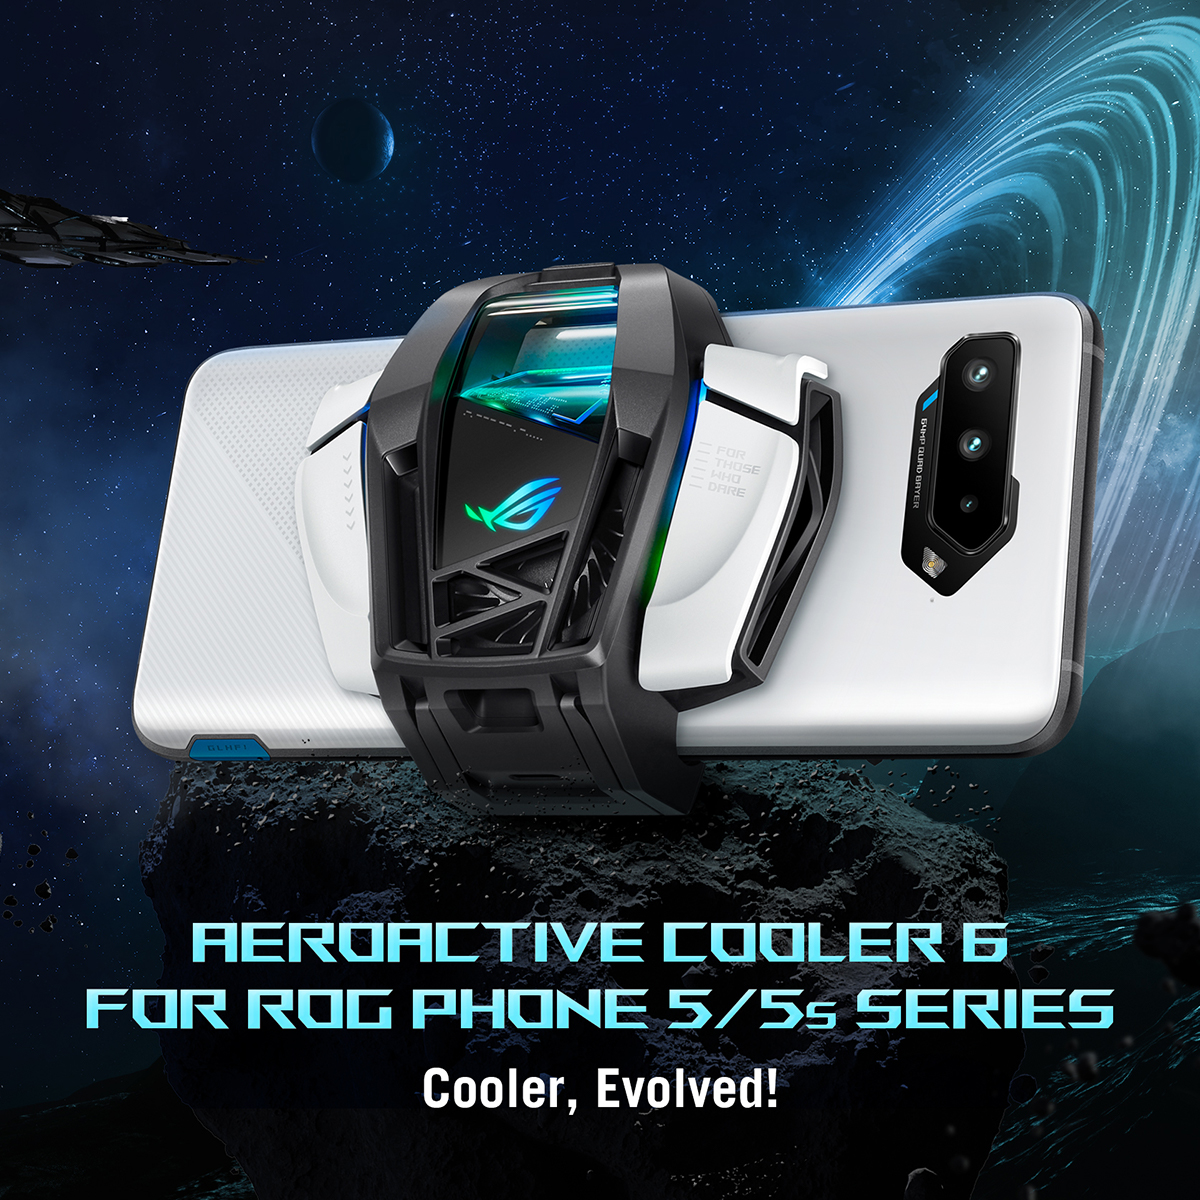 ROG Global on X: Great news! The AeroActive Cooler 6 for the ROG